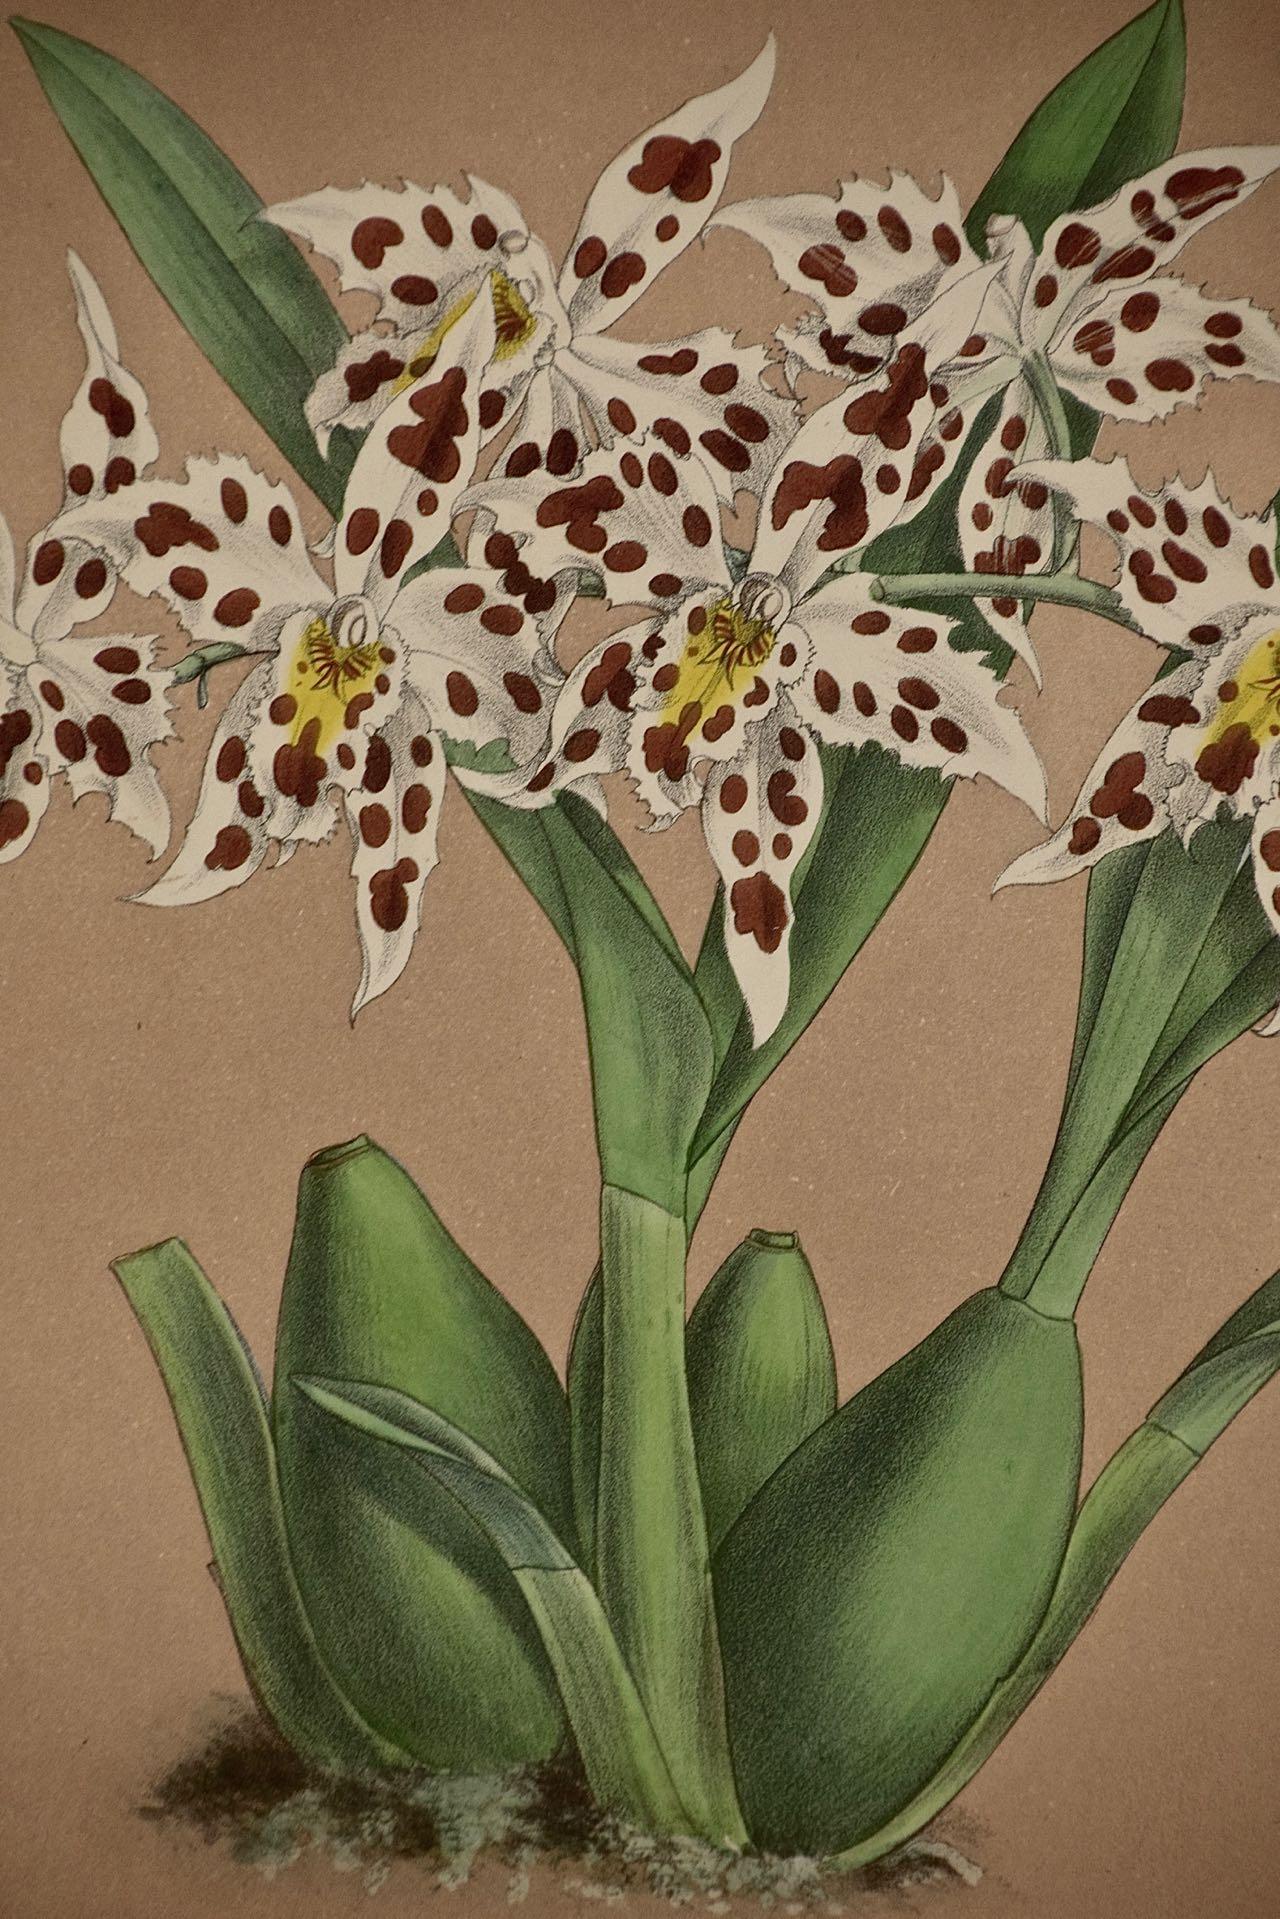 Orchids: Framed 19th C. Hand-colored lithograph of 